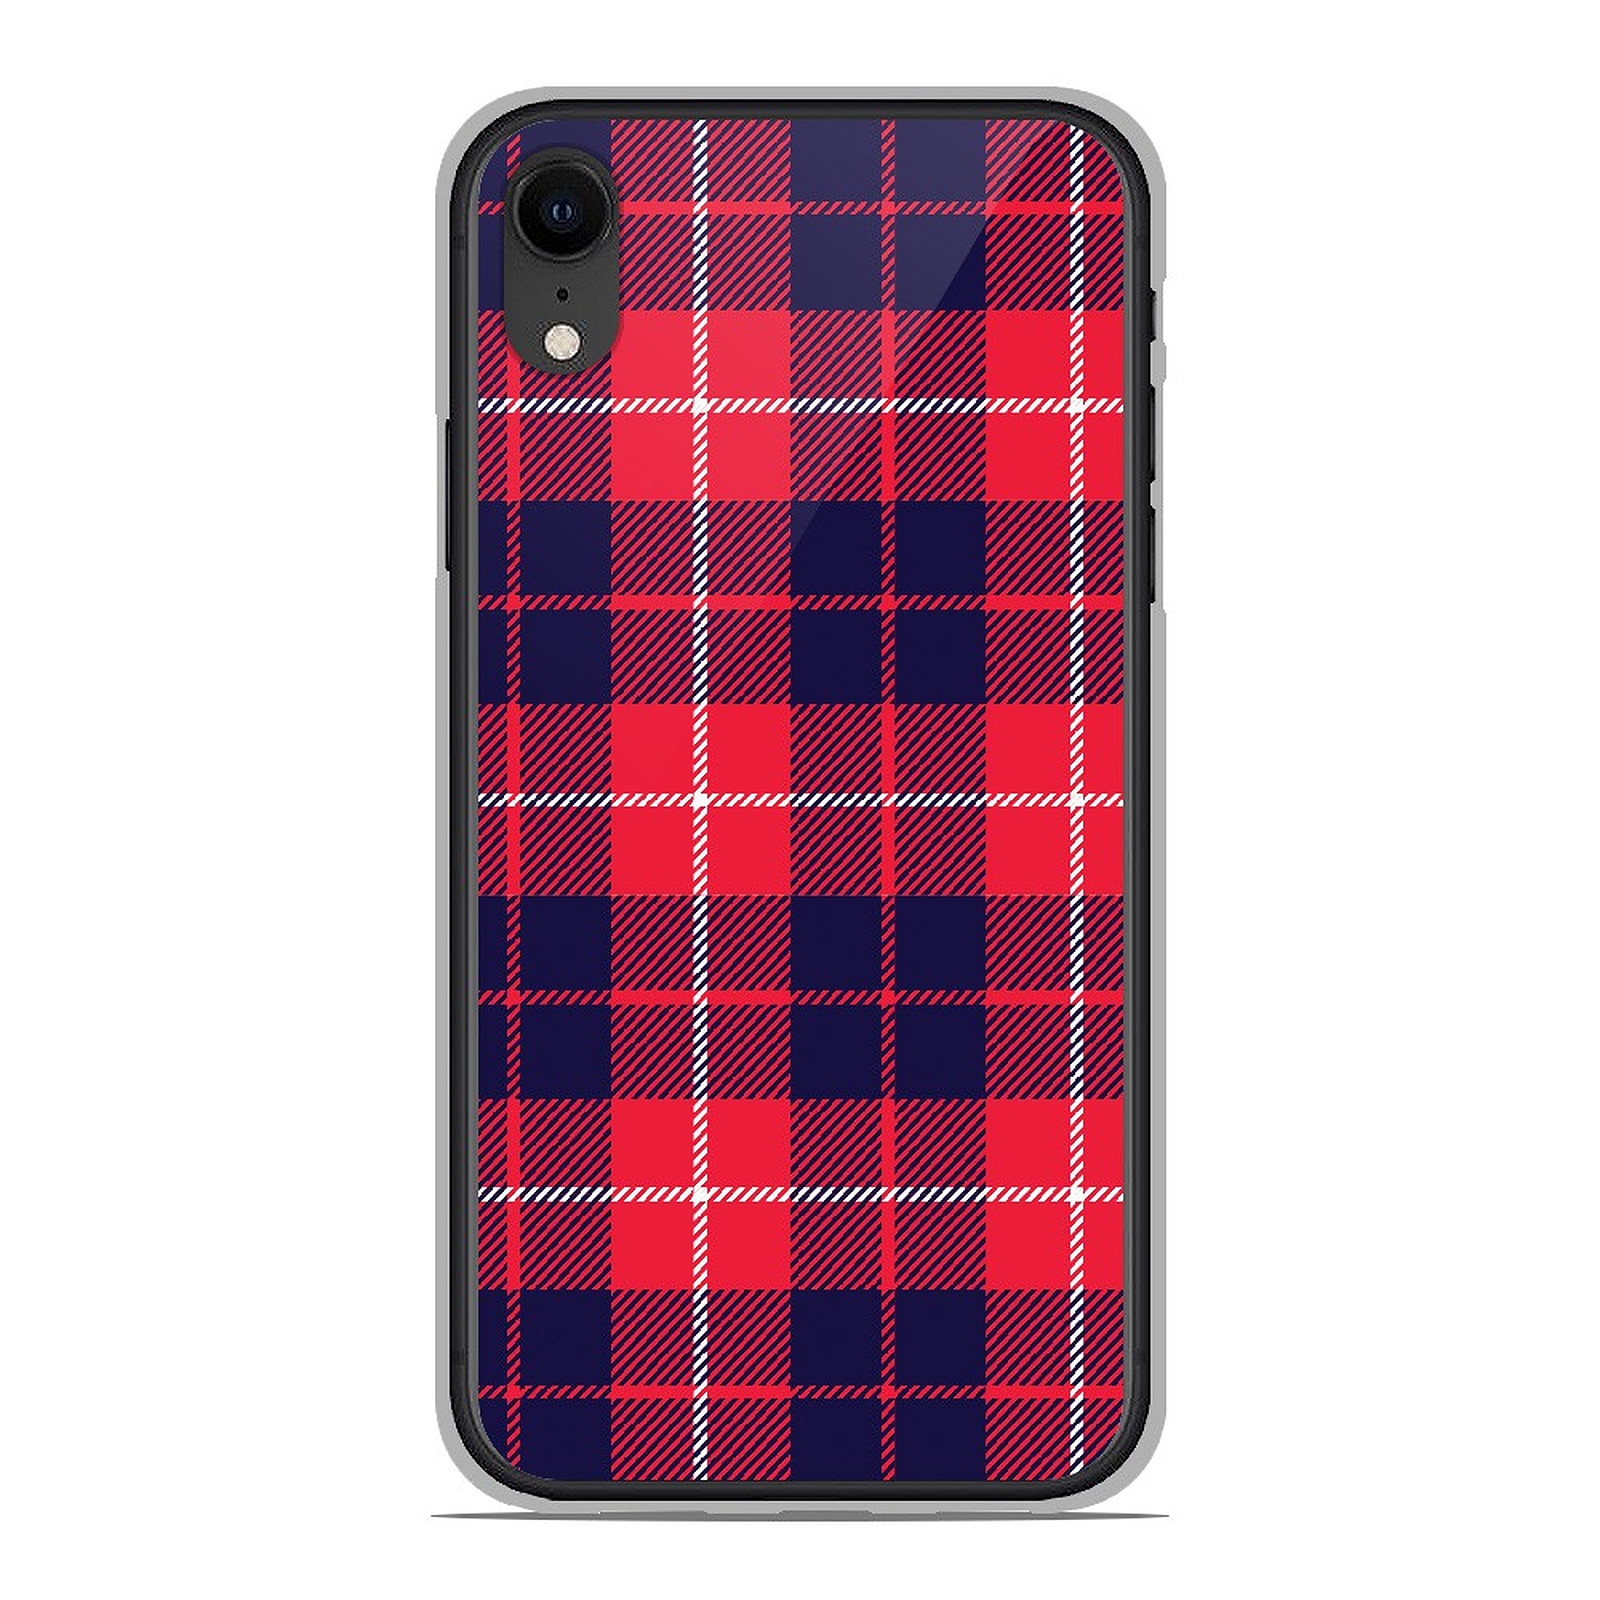 1001 Coques Coque silicone gel Apple iPhone XR motif Tartan Rouge 2 - Coque telephone 1001Coques